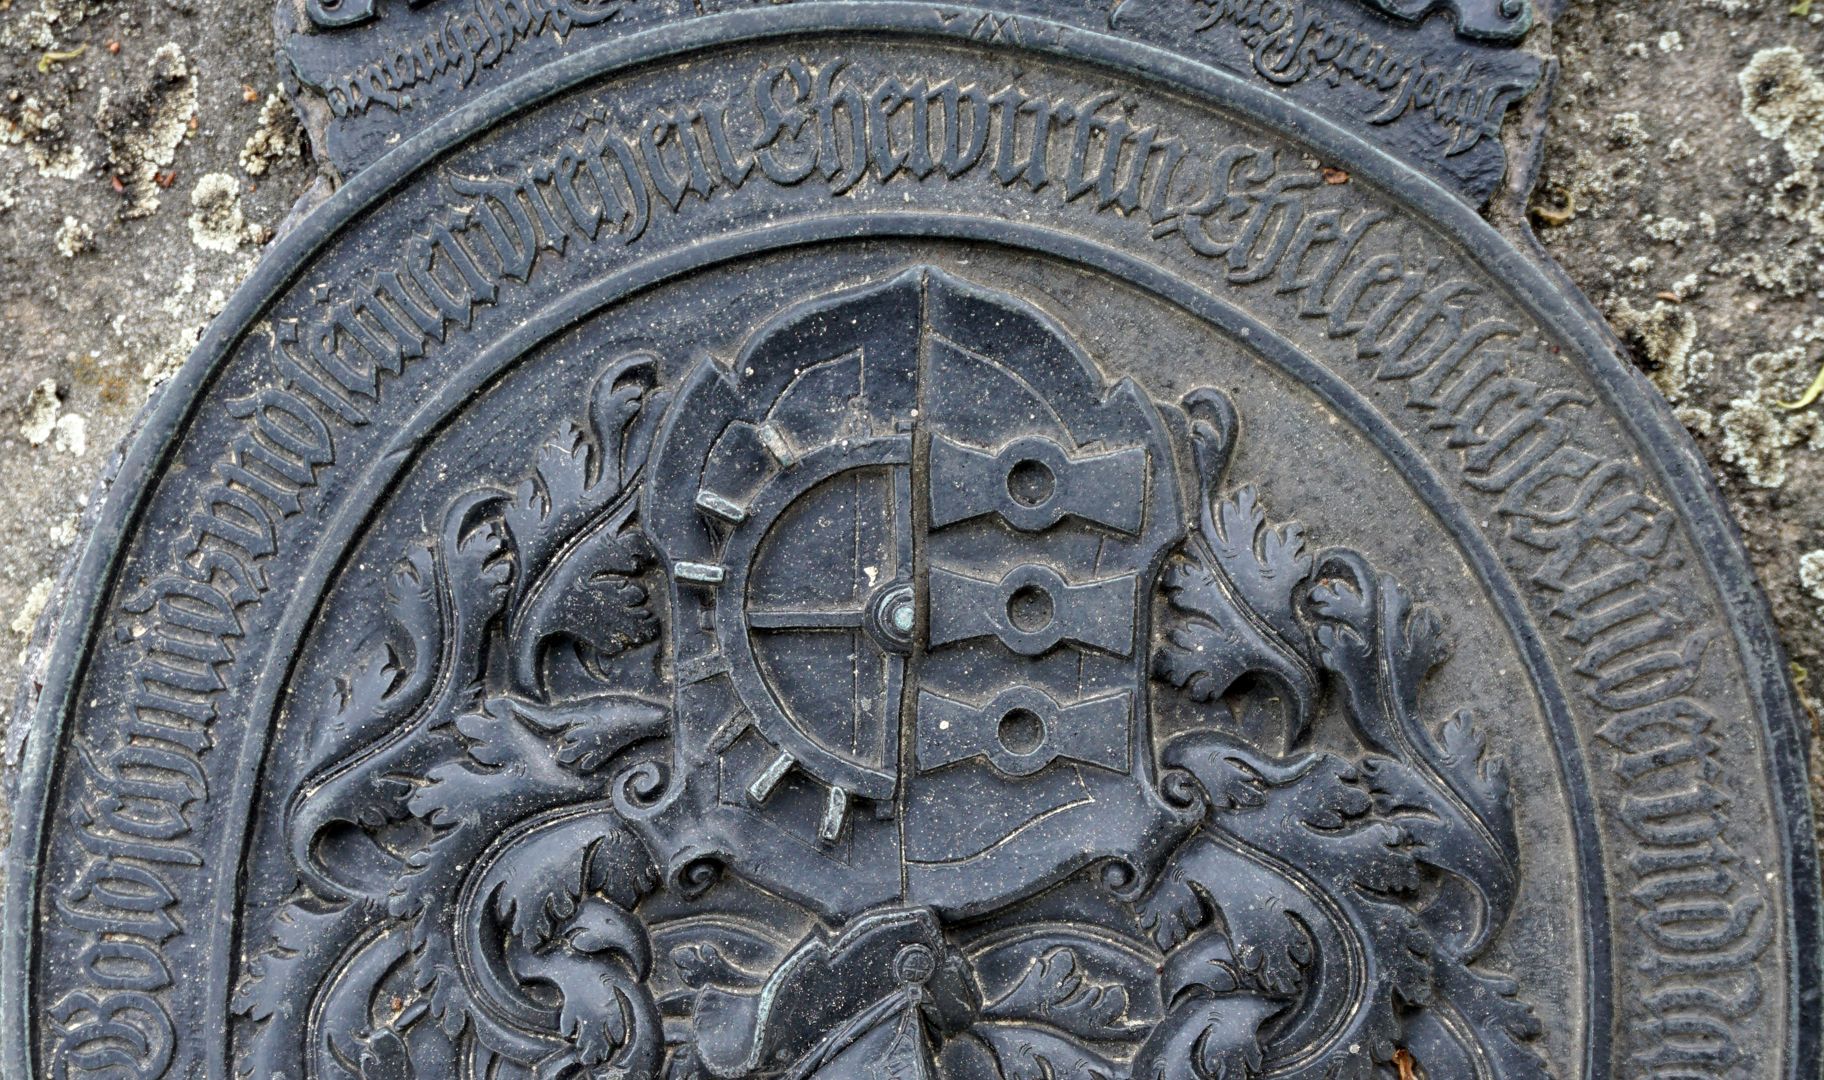 Epitaph of the goldsmith Caspar Beutmüller below cartouche (image standing on its head)